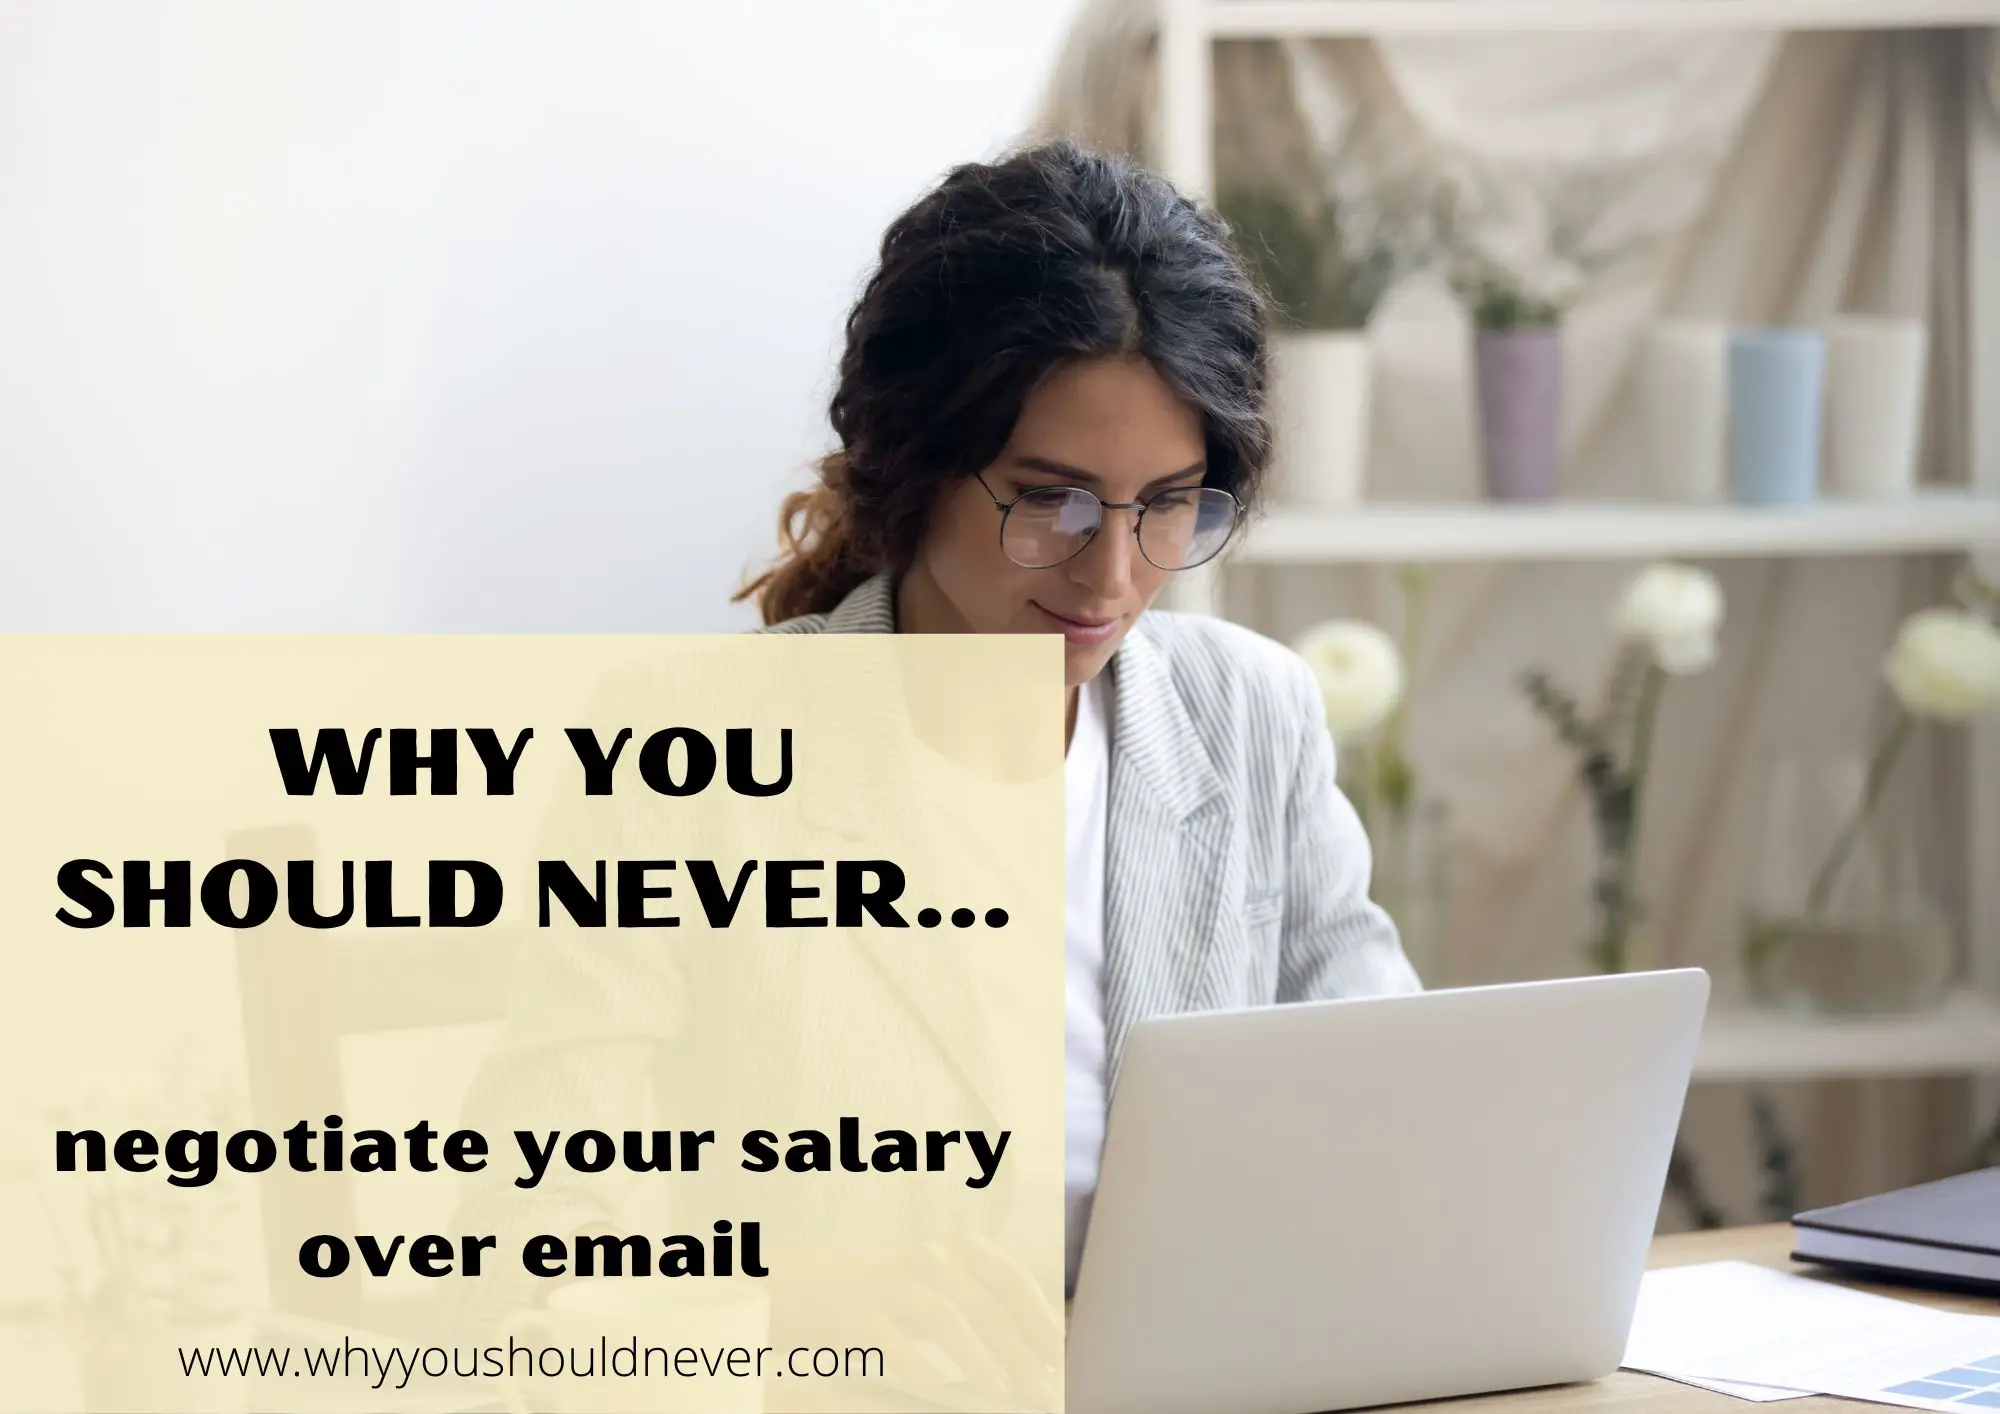 Why You Should Never Negotiate Your Salary Over Email